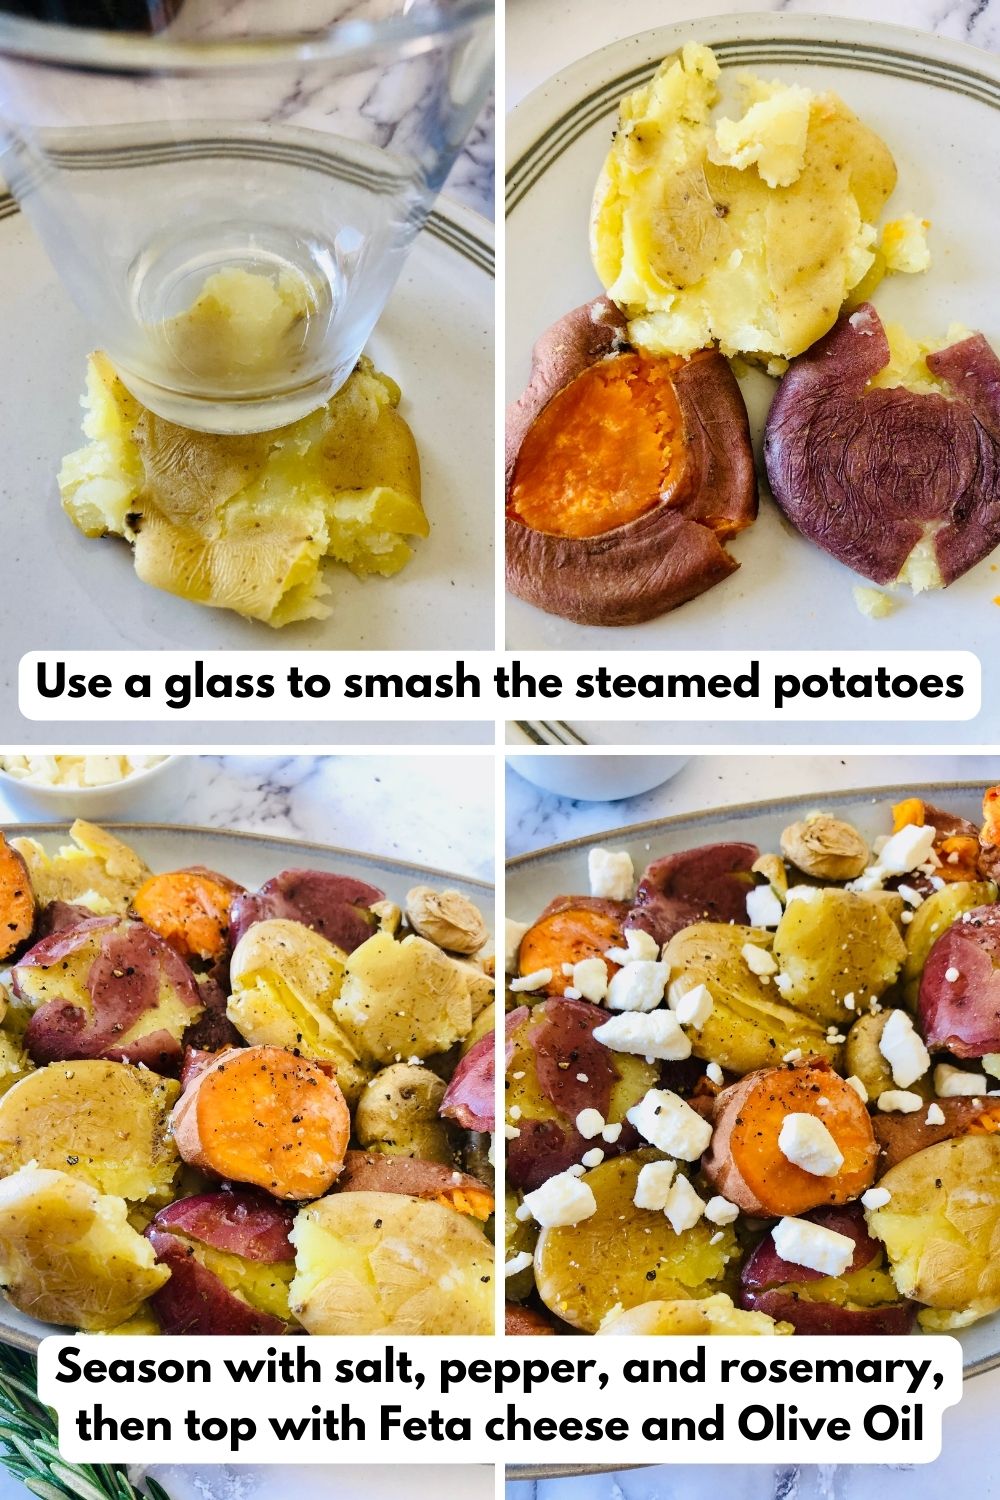 instructions for making WW smashed potatoes